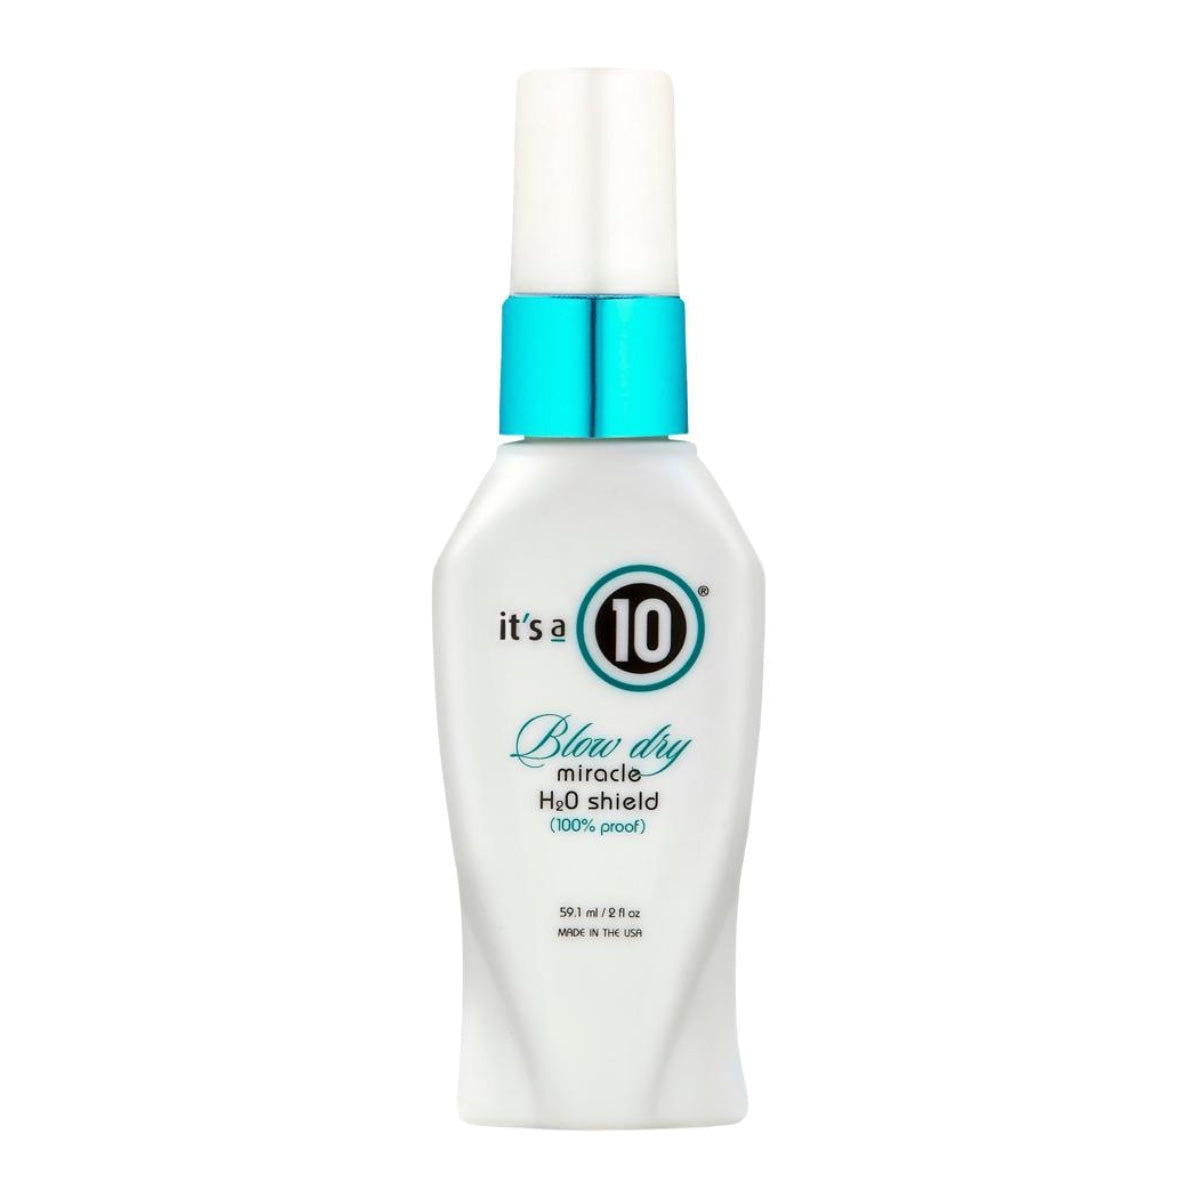 It's A 10 Blow Dry Miracle H2O Shield 2 oz